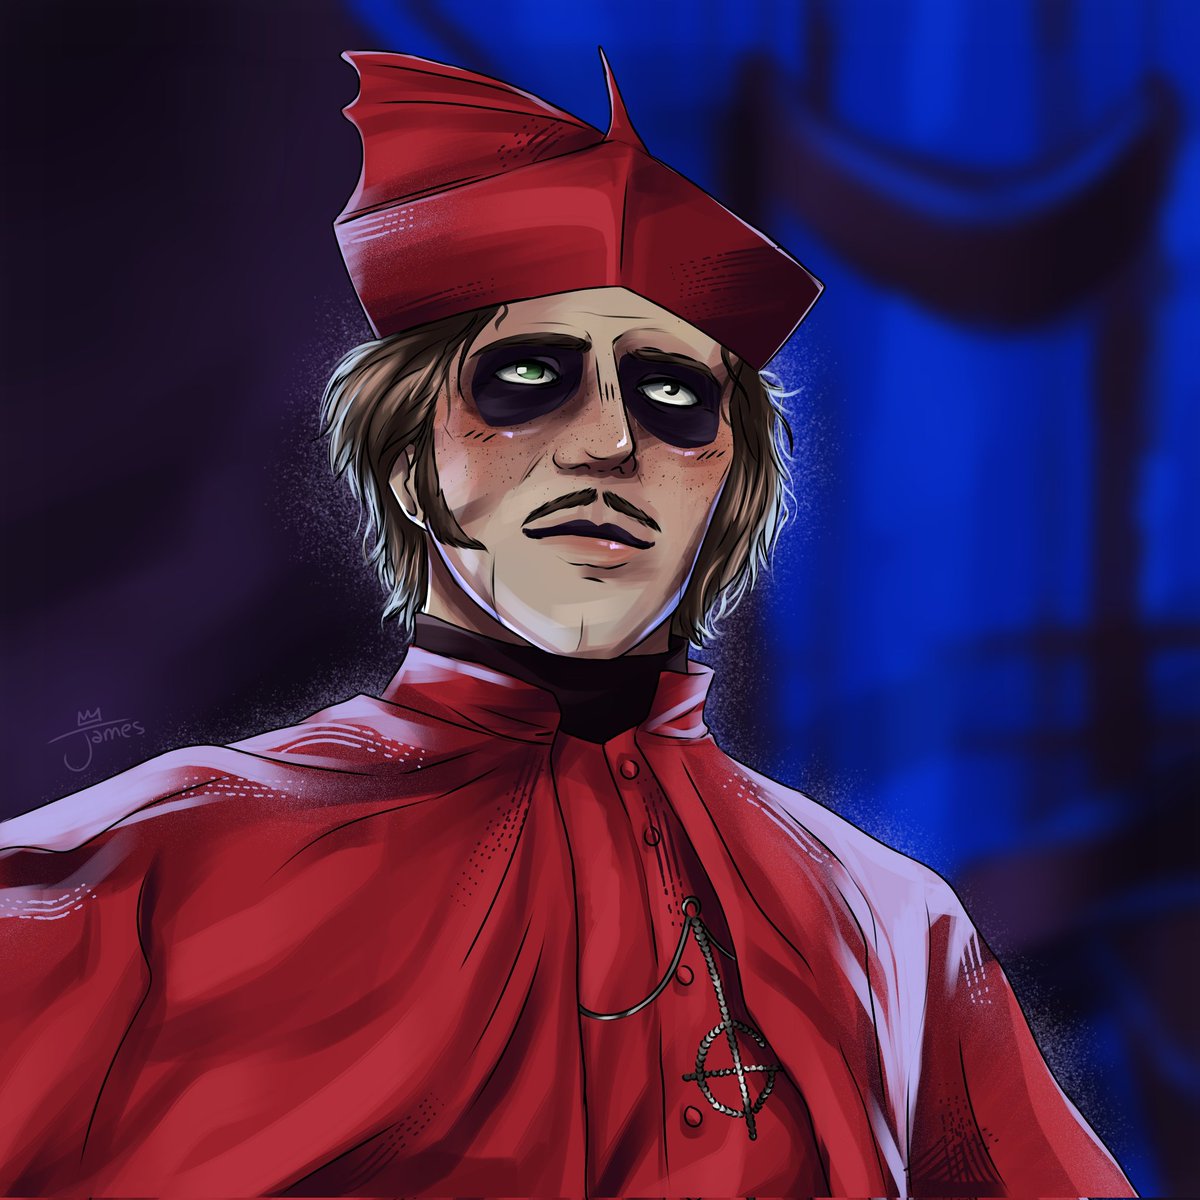 stayed up way too late to finish this

#cardinalcopia #thebandghost